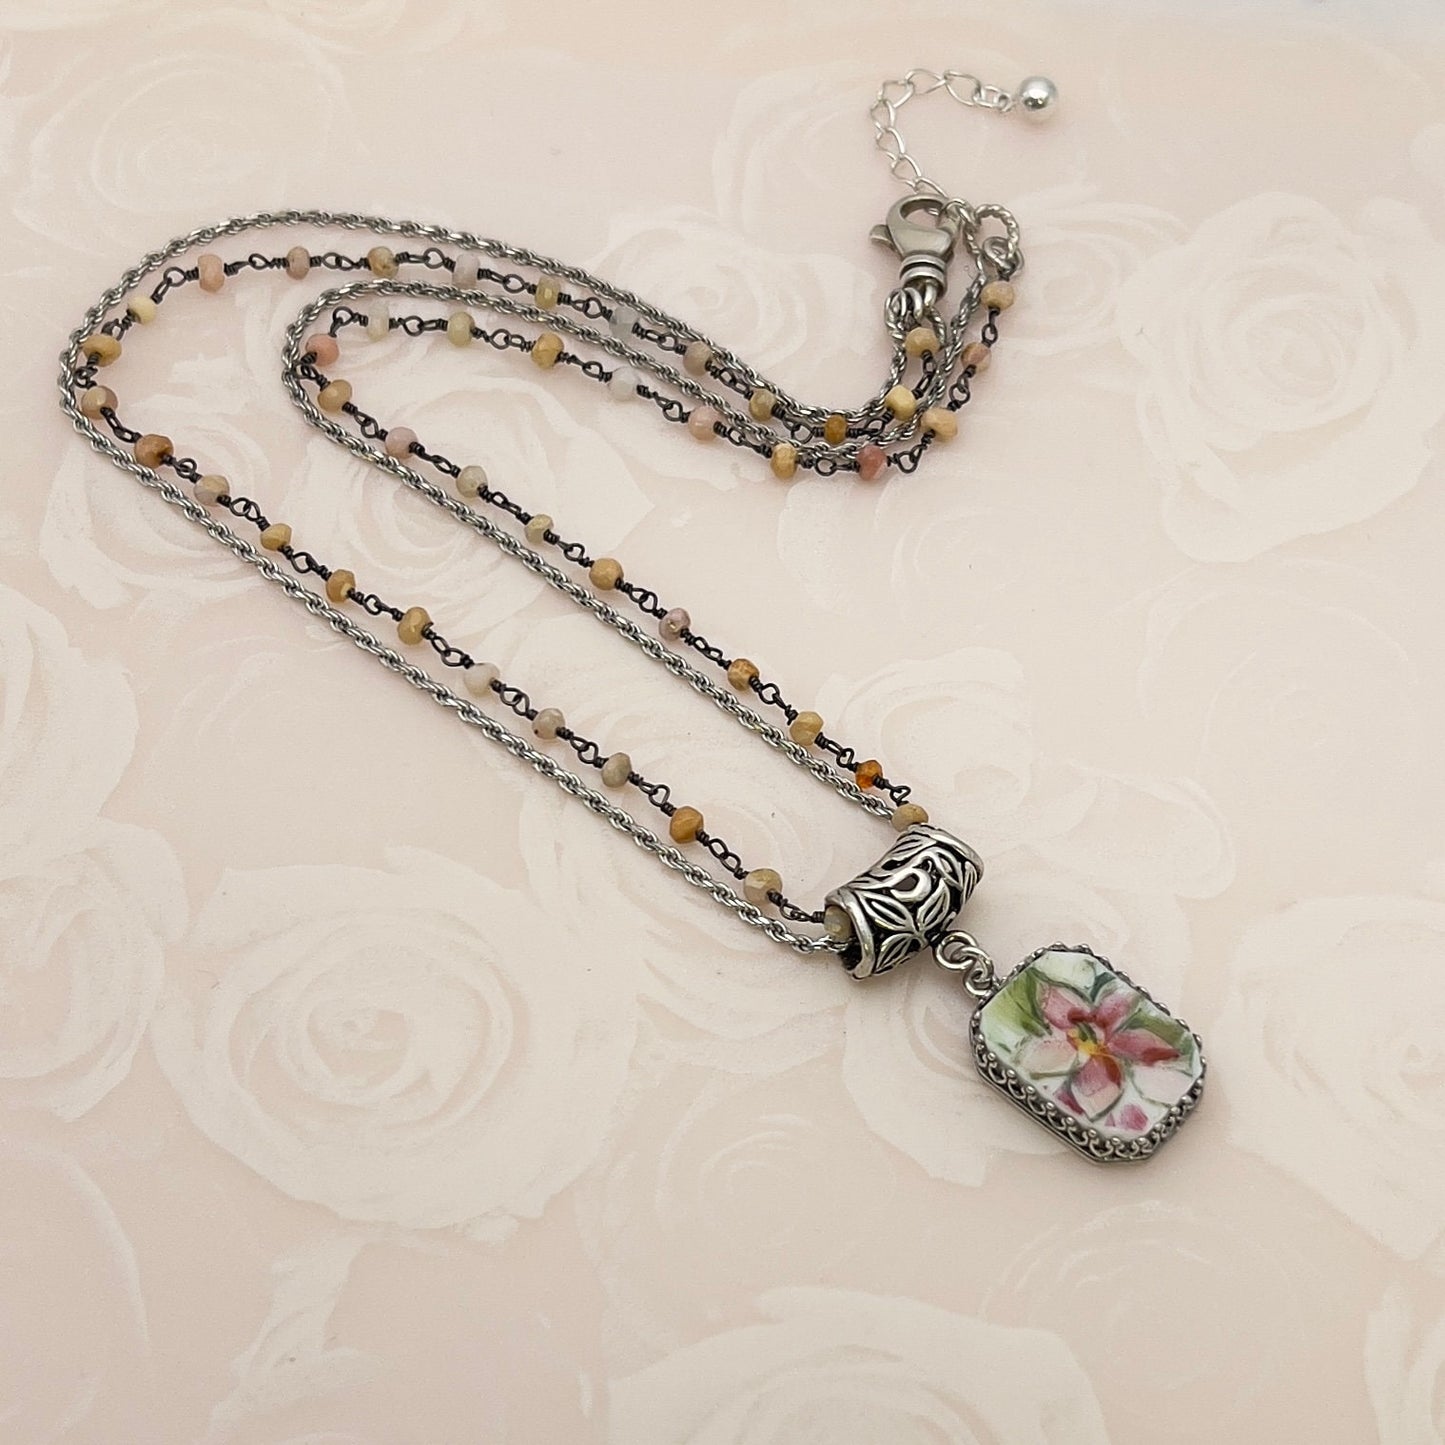 French Limoges Broken China Jewelry Necklace, Hand Painted Antique Porcelain, Sterling Silver and Opal